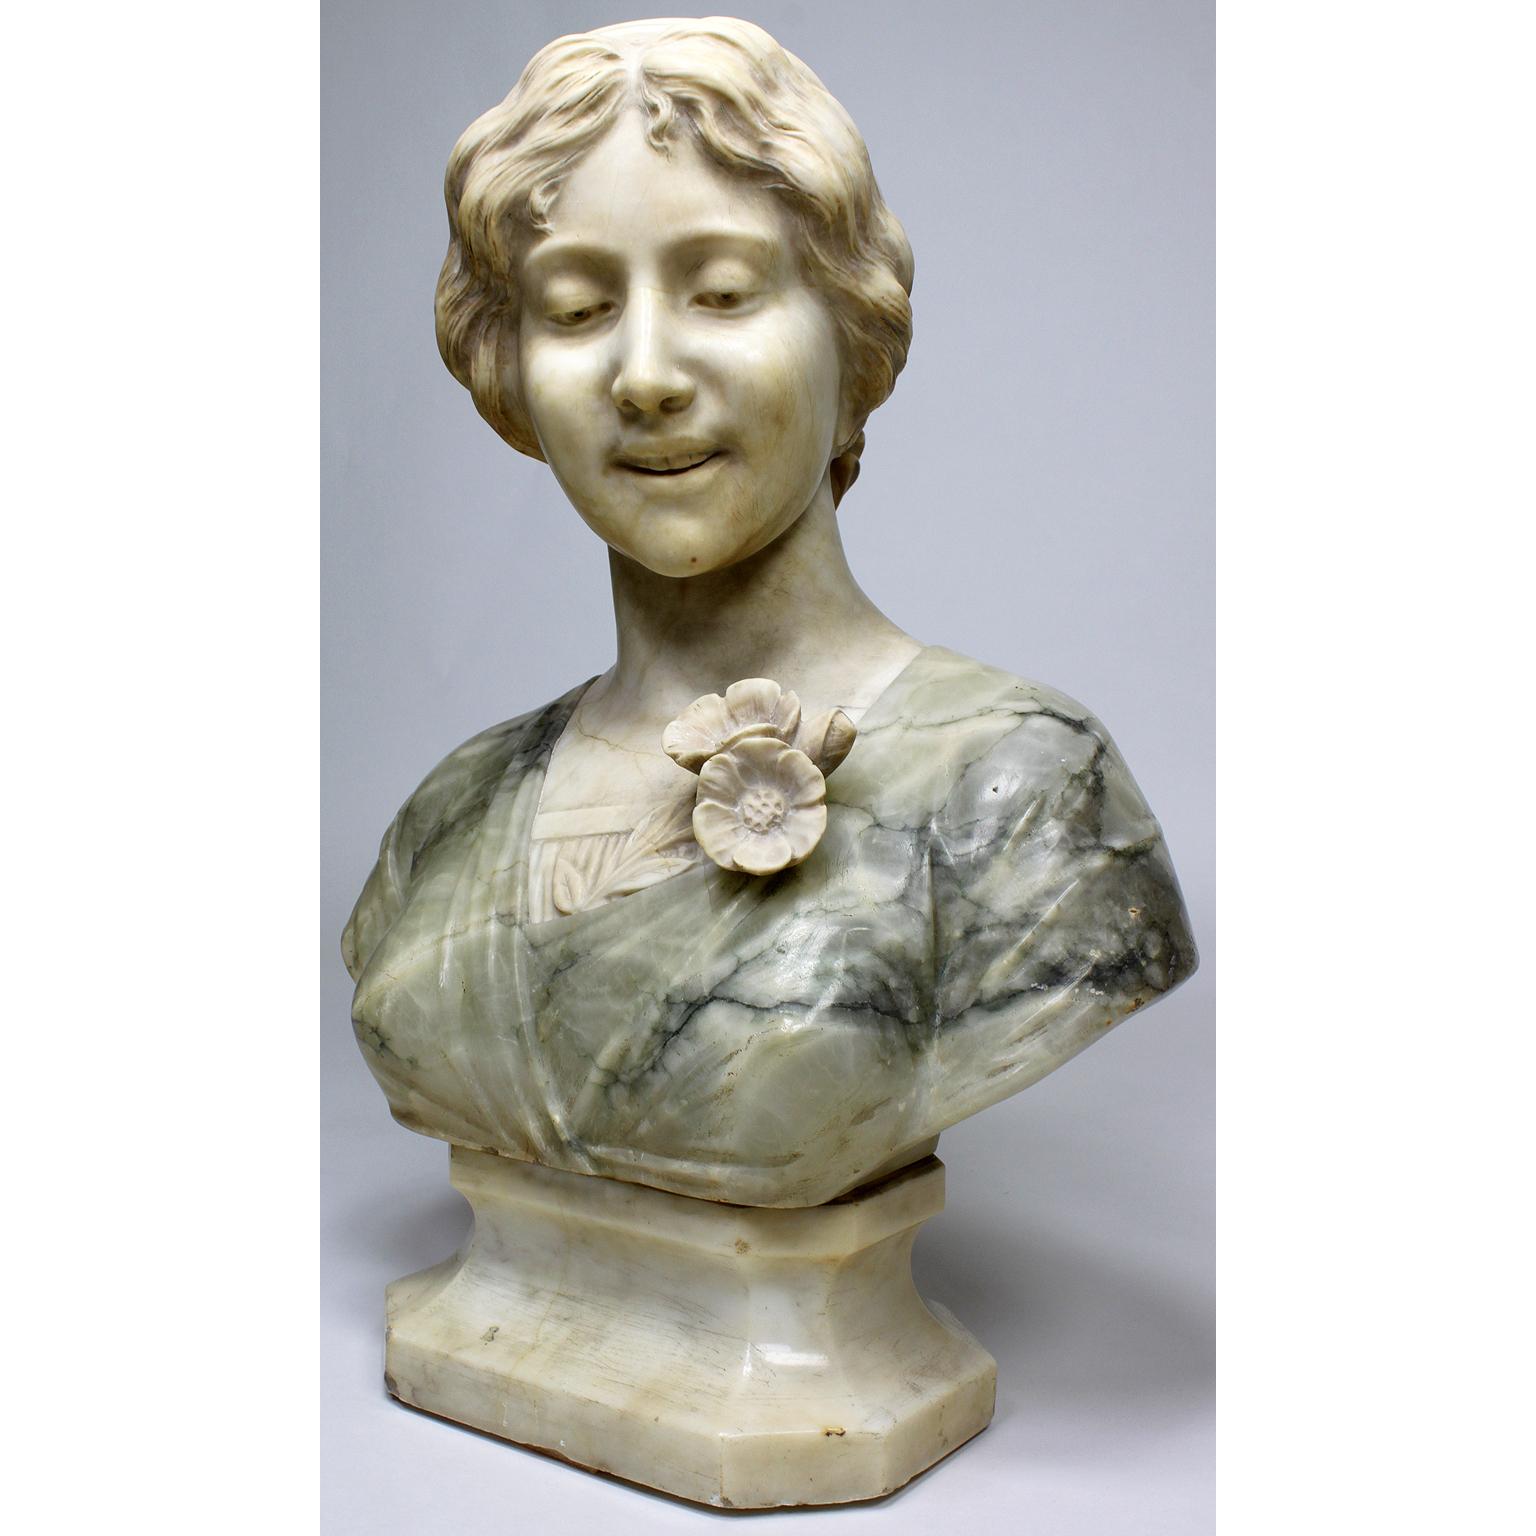 An Italian 19th-20th century carved color-alabaster bust of a young beauty. The finely carved two-tone alabaster bust, depicting a young girl posing with a side gaze and wavy hair tied with a headscarf, her blouse is depicted in an